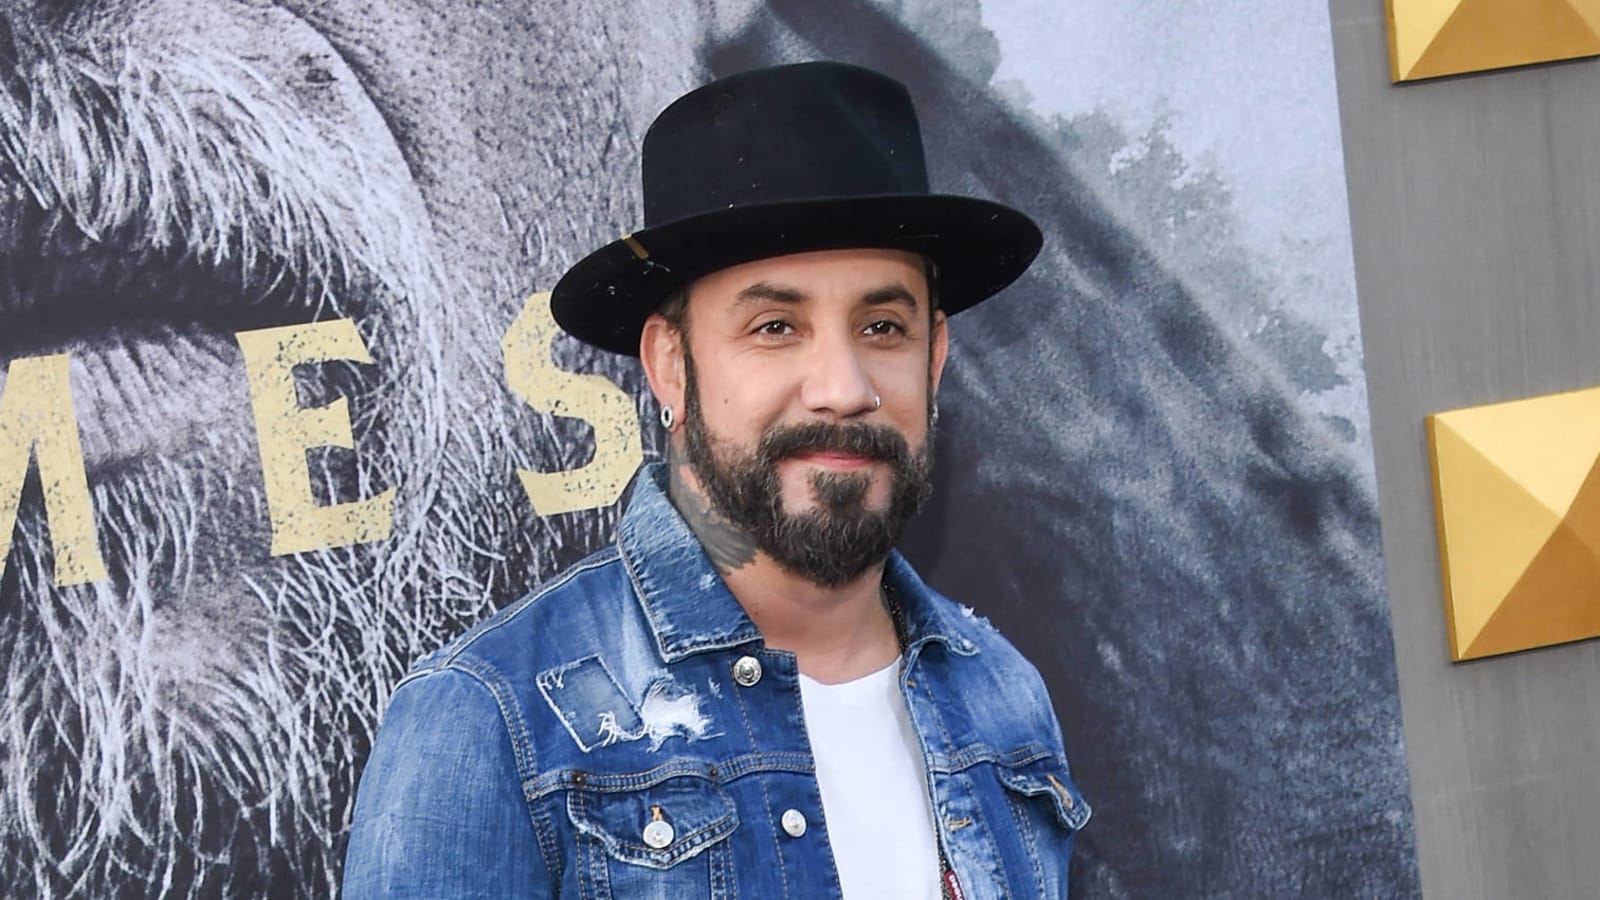 AJ McLean says Britney Spears' conservatorship is 'grotesque': 'The last time I saw her it broke my heart'